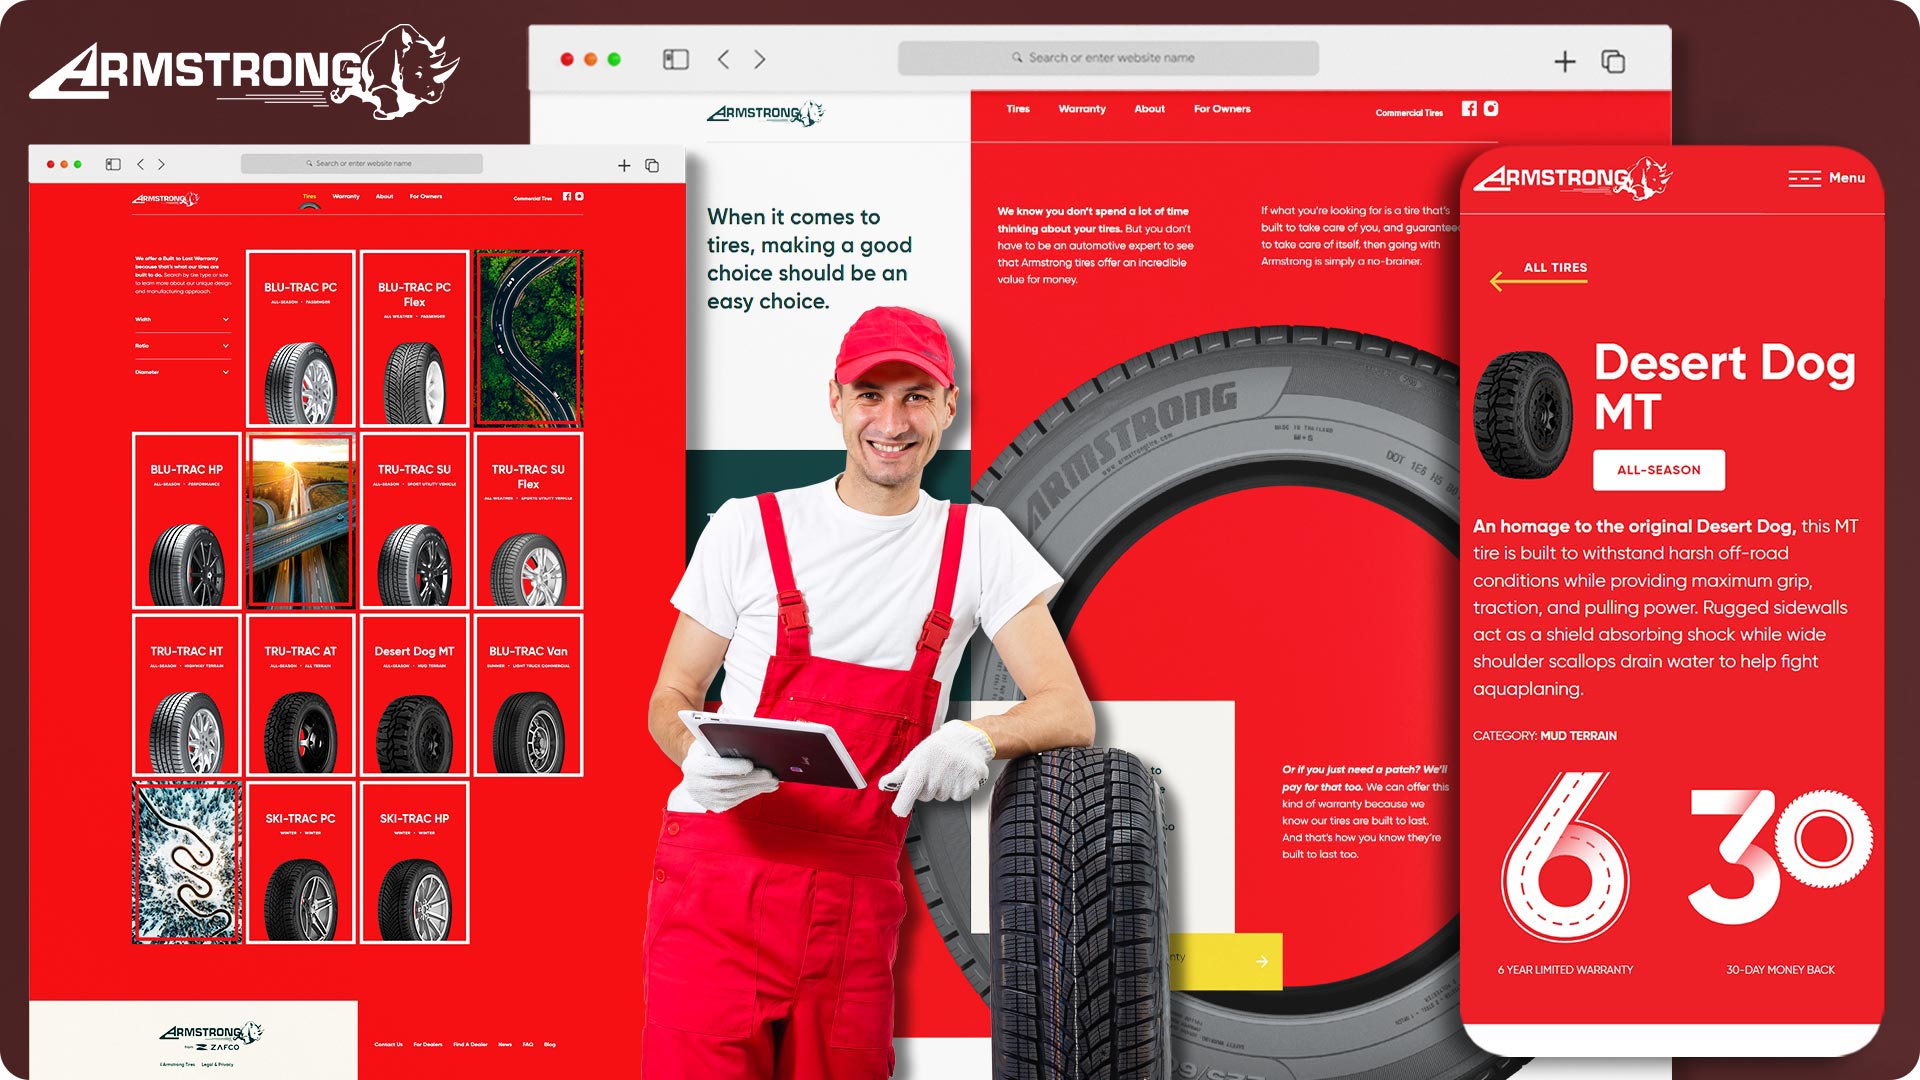 Armstrong Tires